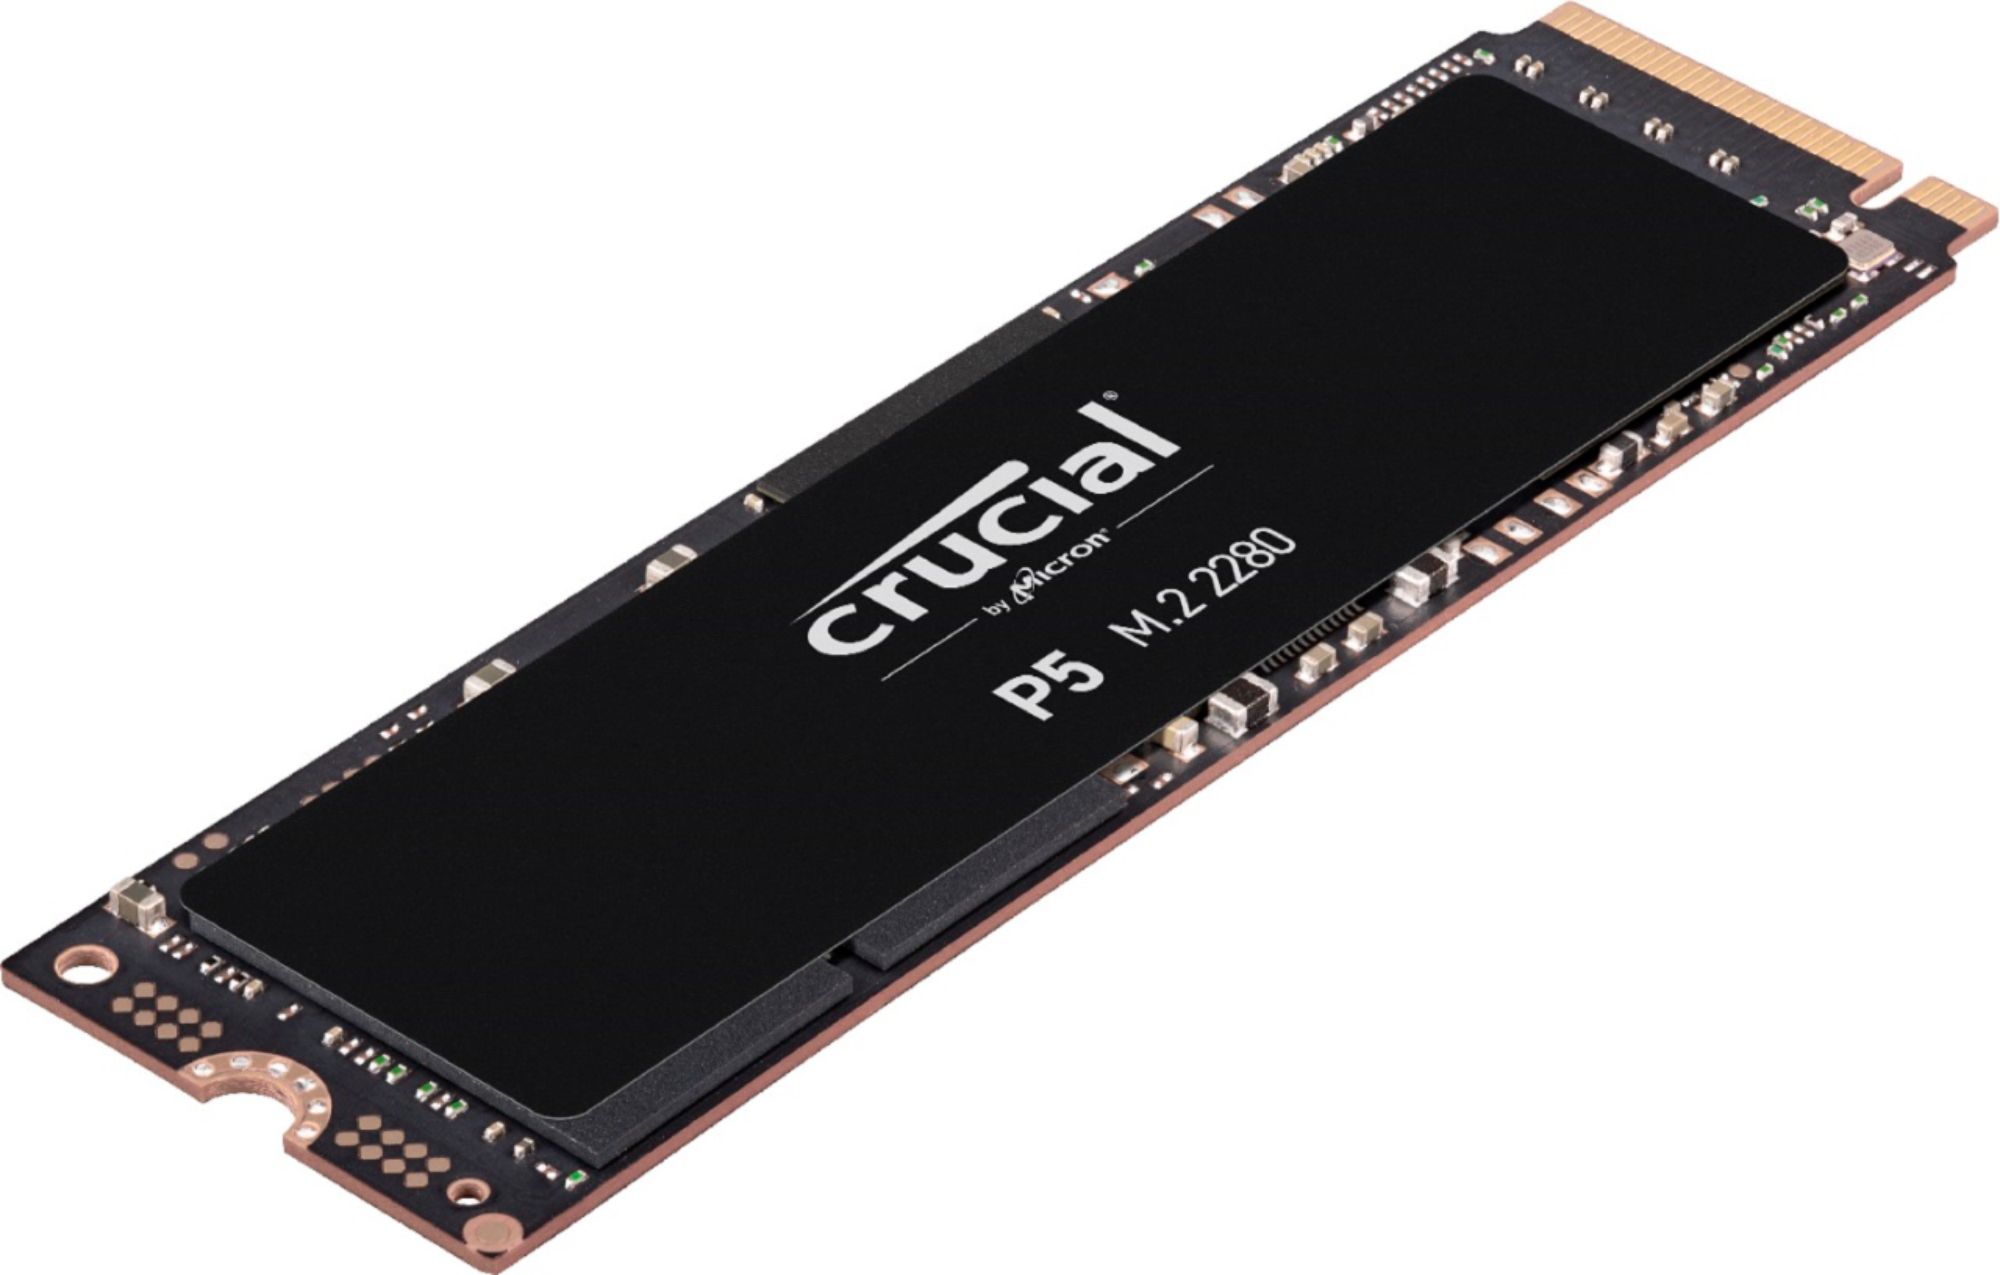 Crucial - P5 1TB 3D NAND PCIe Gen 3 x4 NVMe Internal Solid State Drive M.2